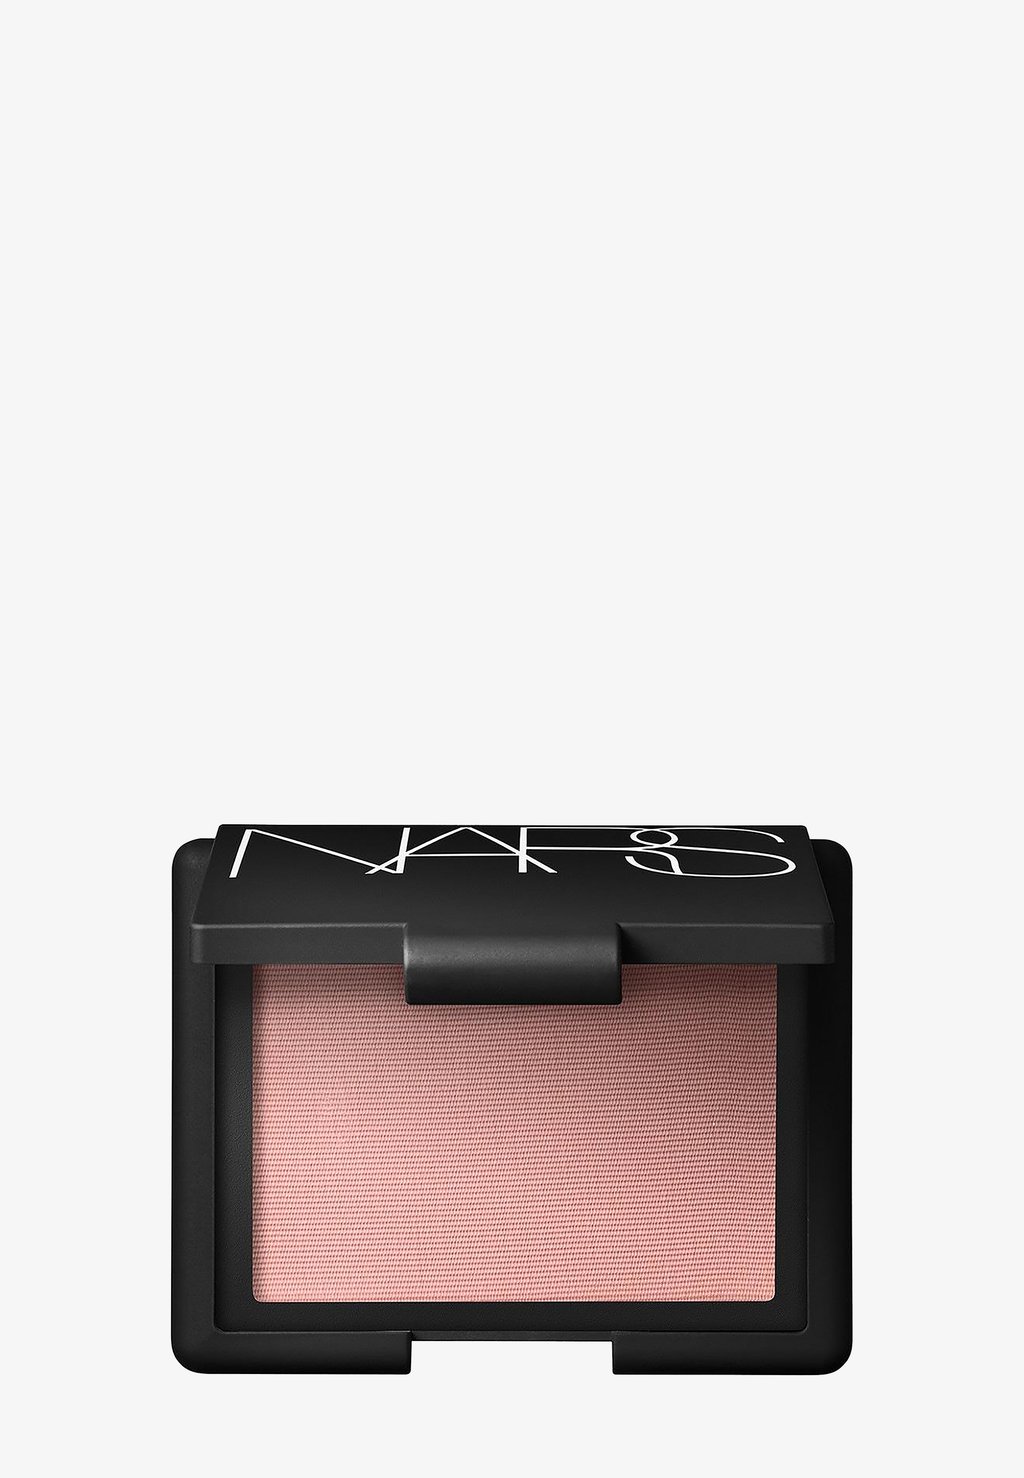 Румяна BLUSH NARS, цвет sex appeal explode sex appeal and voluptuous naked back jacquard bag buttock skirt sexy underwear female sex appeal underwear